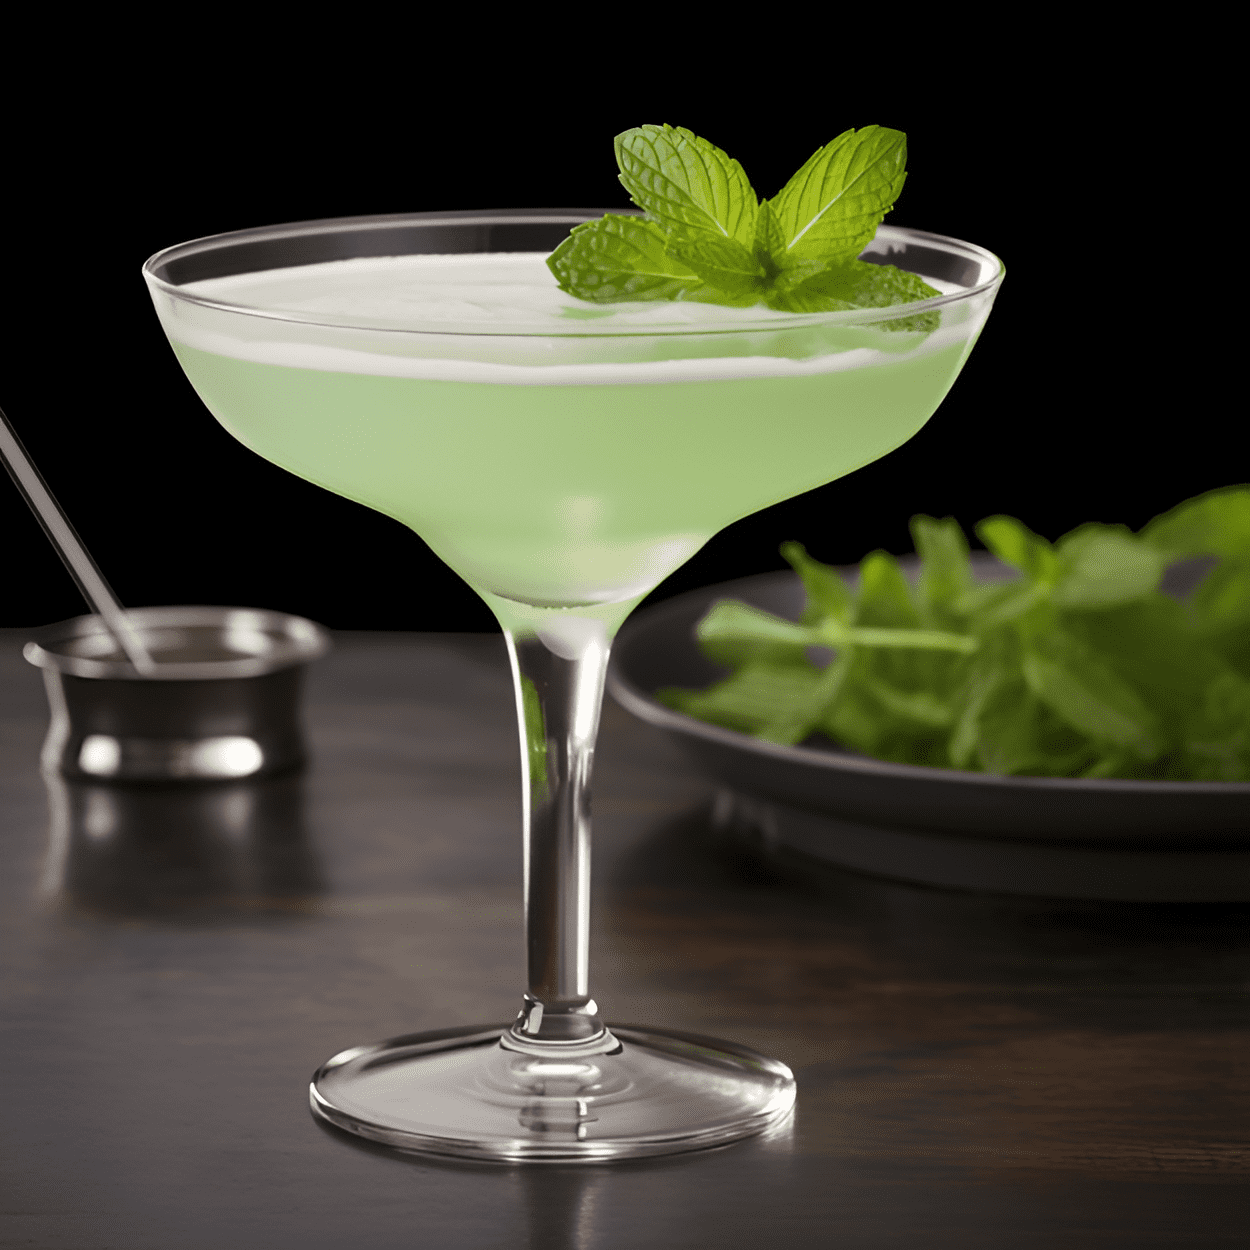 Vodka Stinger Cocktail Recipe - The Vodka Stinger is a strong, potent cocktail with a clean, crisp taste from the vodka. The crème de menthe adds a sweet, minty freshness that balances the strength of the vodka, making it a refreshing, yet powerful drink.